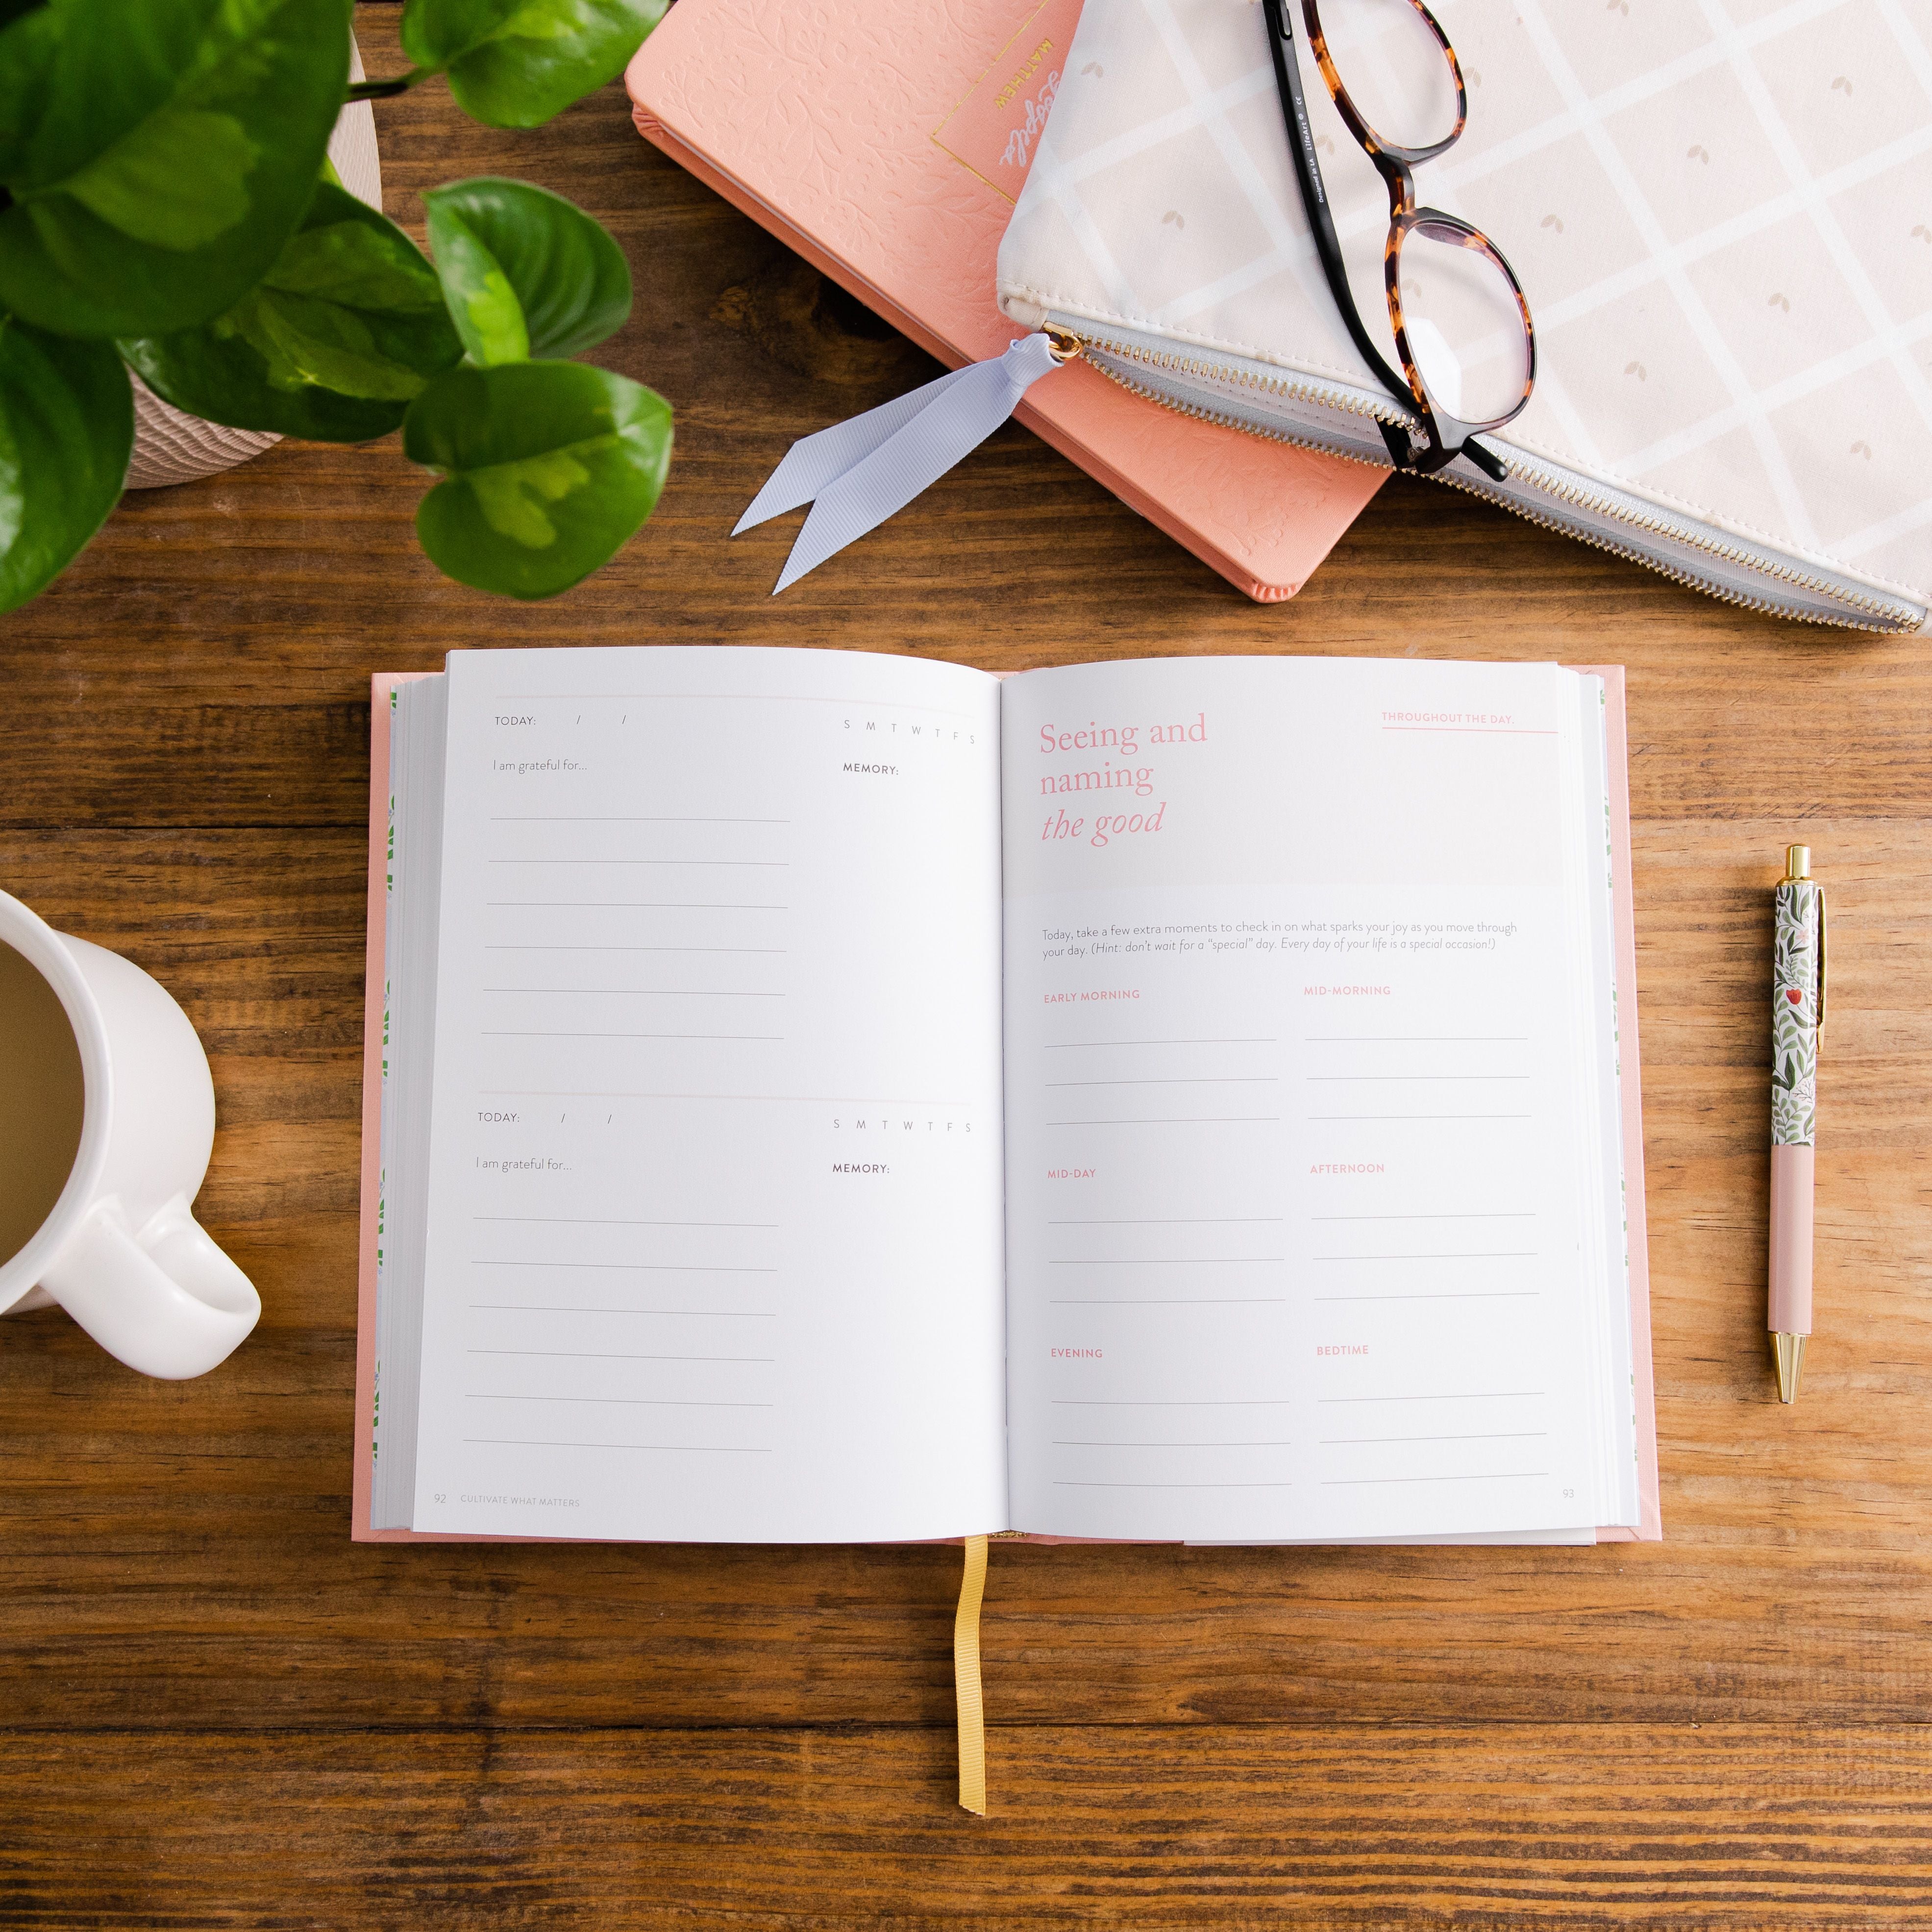 5 Types of Journaling that Can Change Your Life